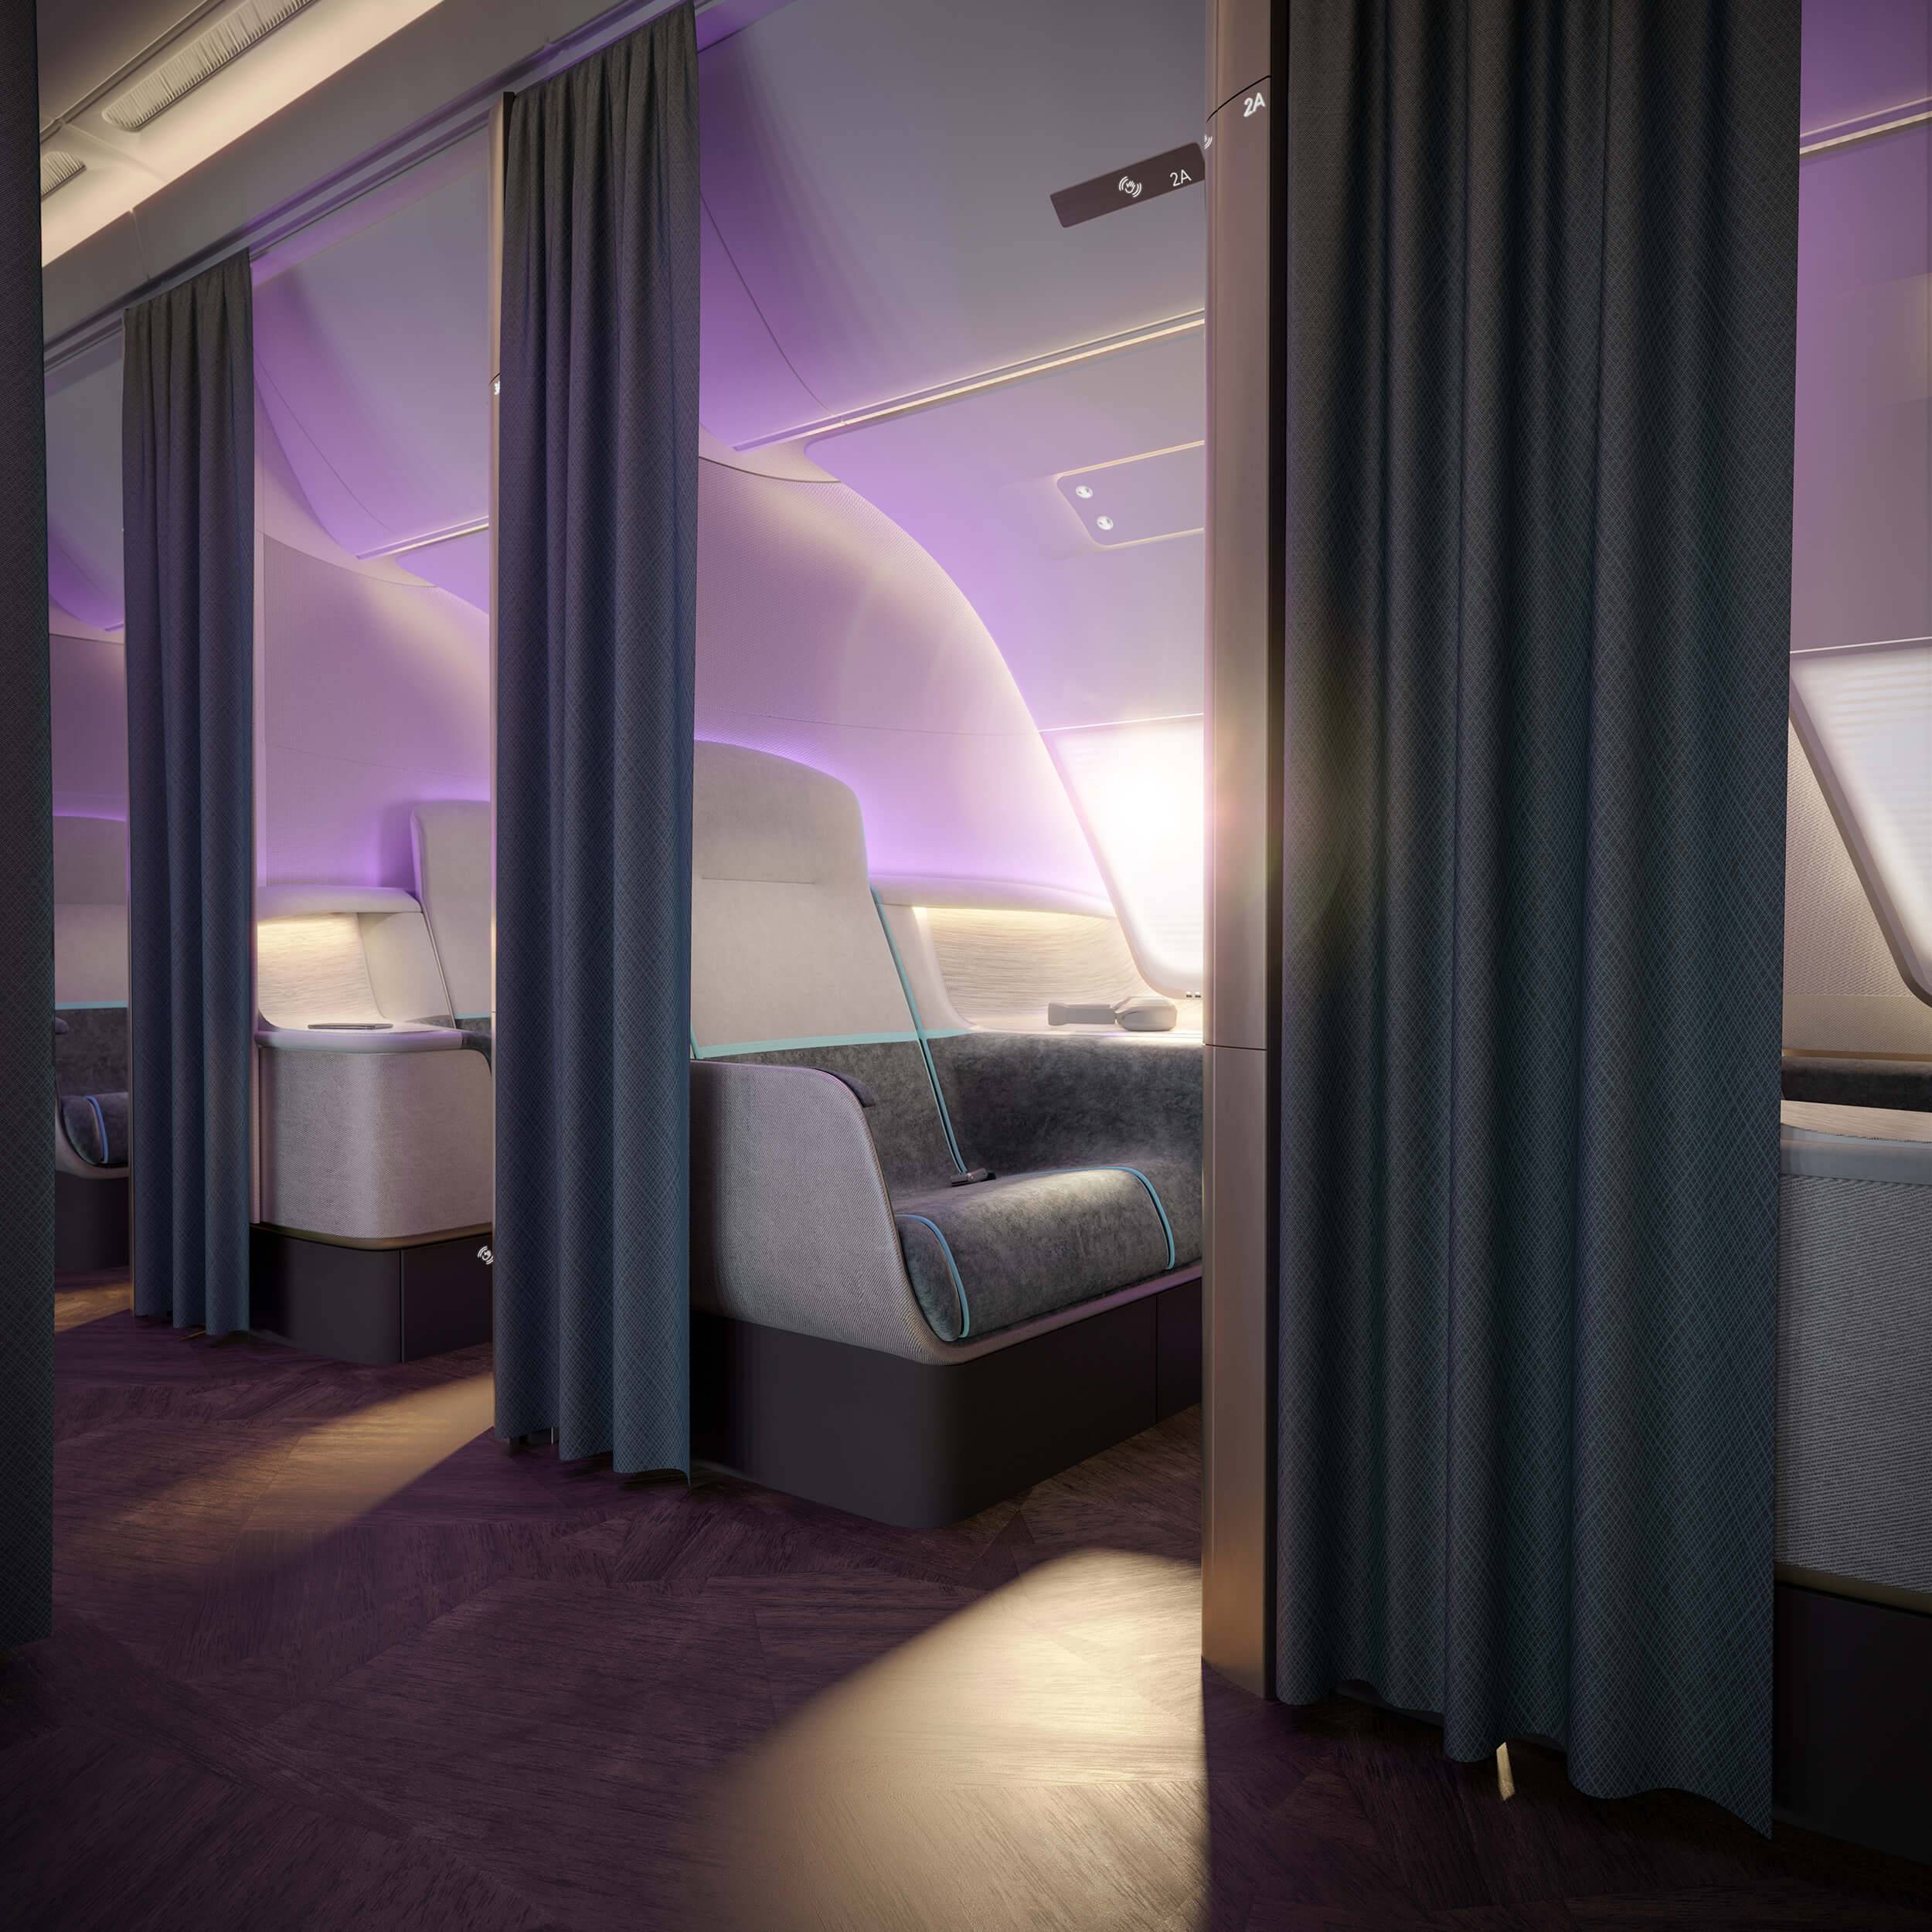 A series of business class aircraft seats, each in its own contained space, which can be made private with a floor to ceiling curtain